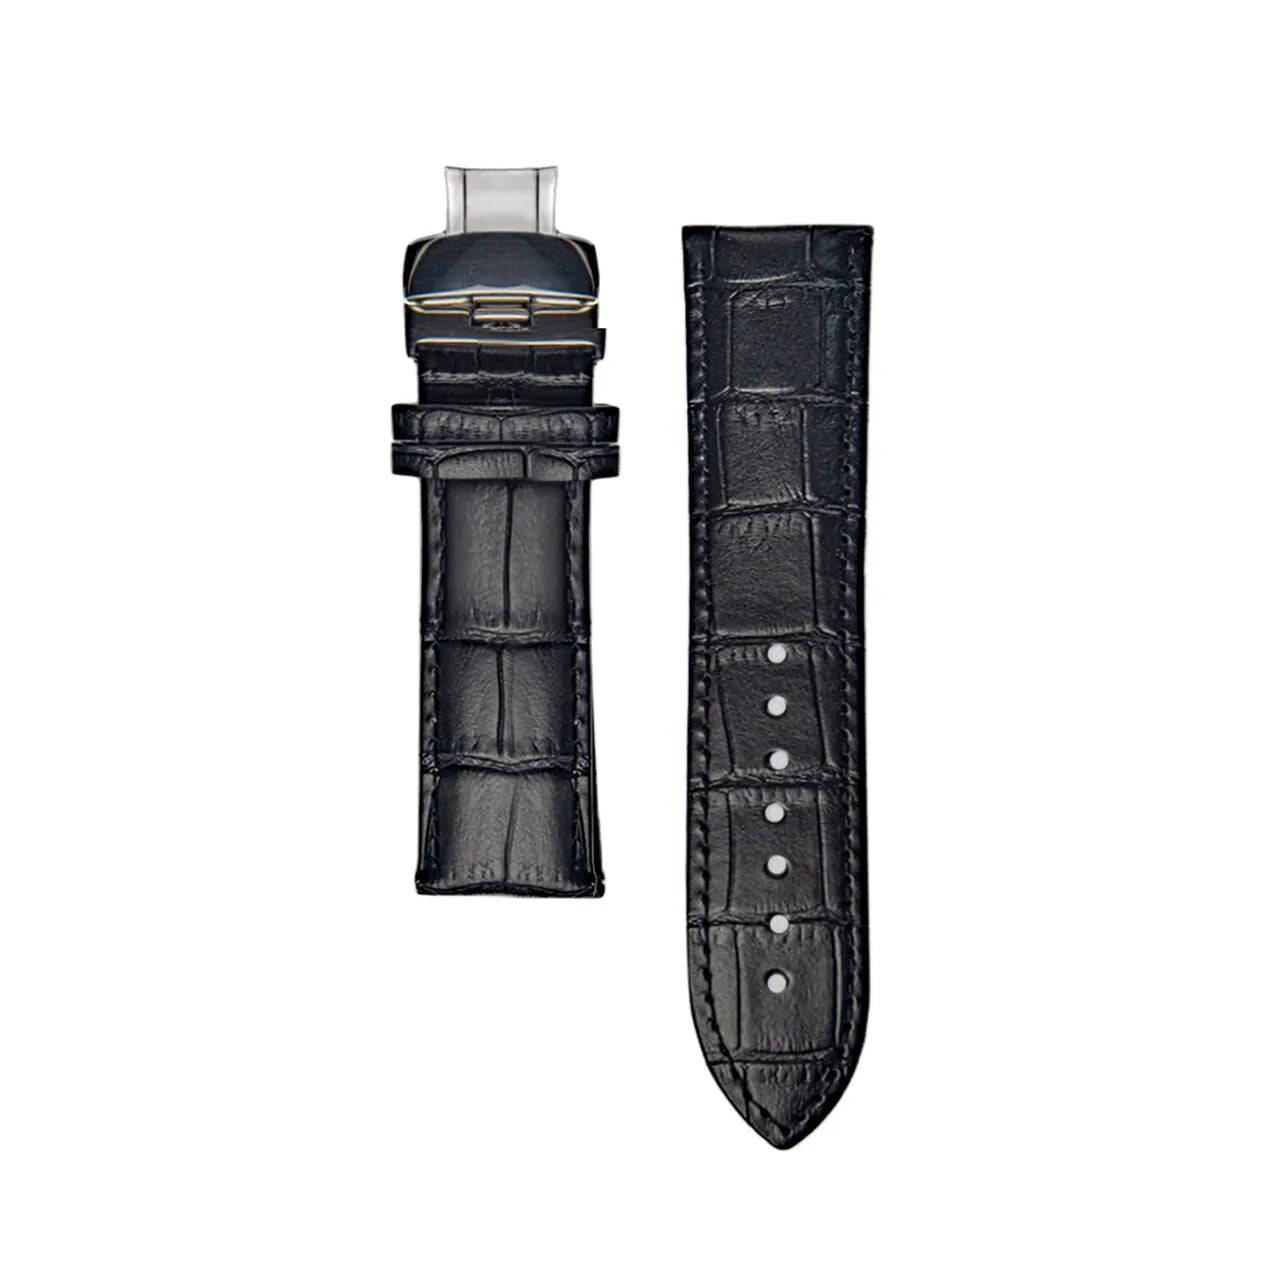 Explore our Leather Bracelet in Black with a unique pattern, a stylish accessory from a young German startup specializing in innovative wheel-inspired designs. Perfect for auto enthusiasts, motorsport, and tuning lovers. Elevate your style today!